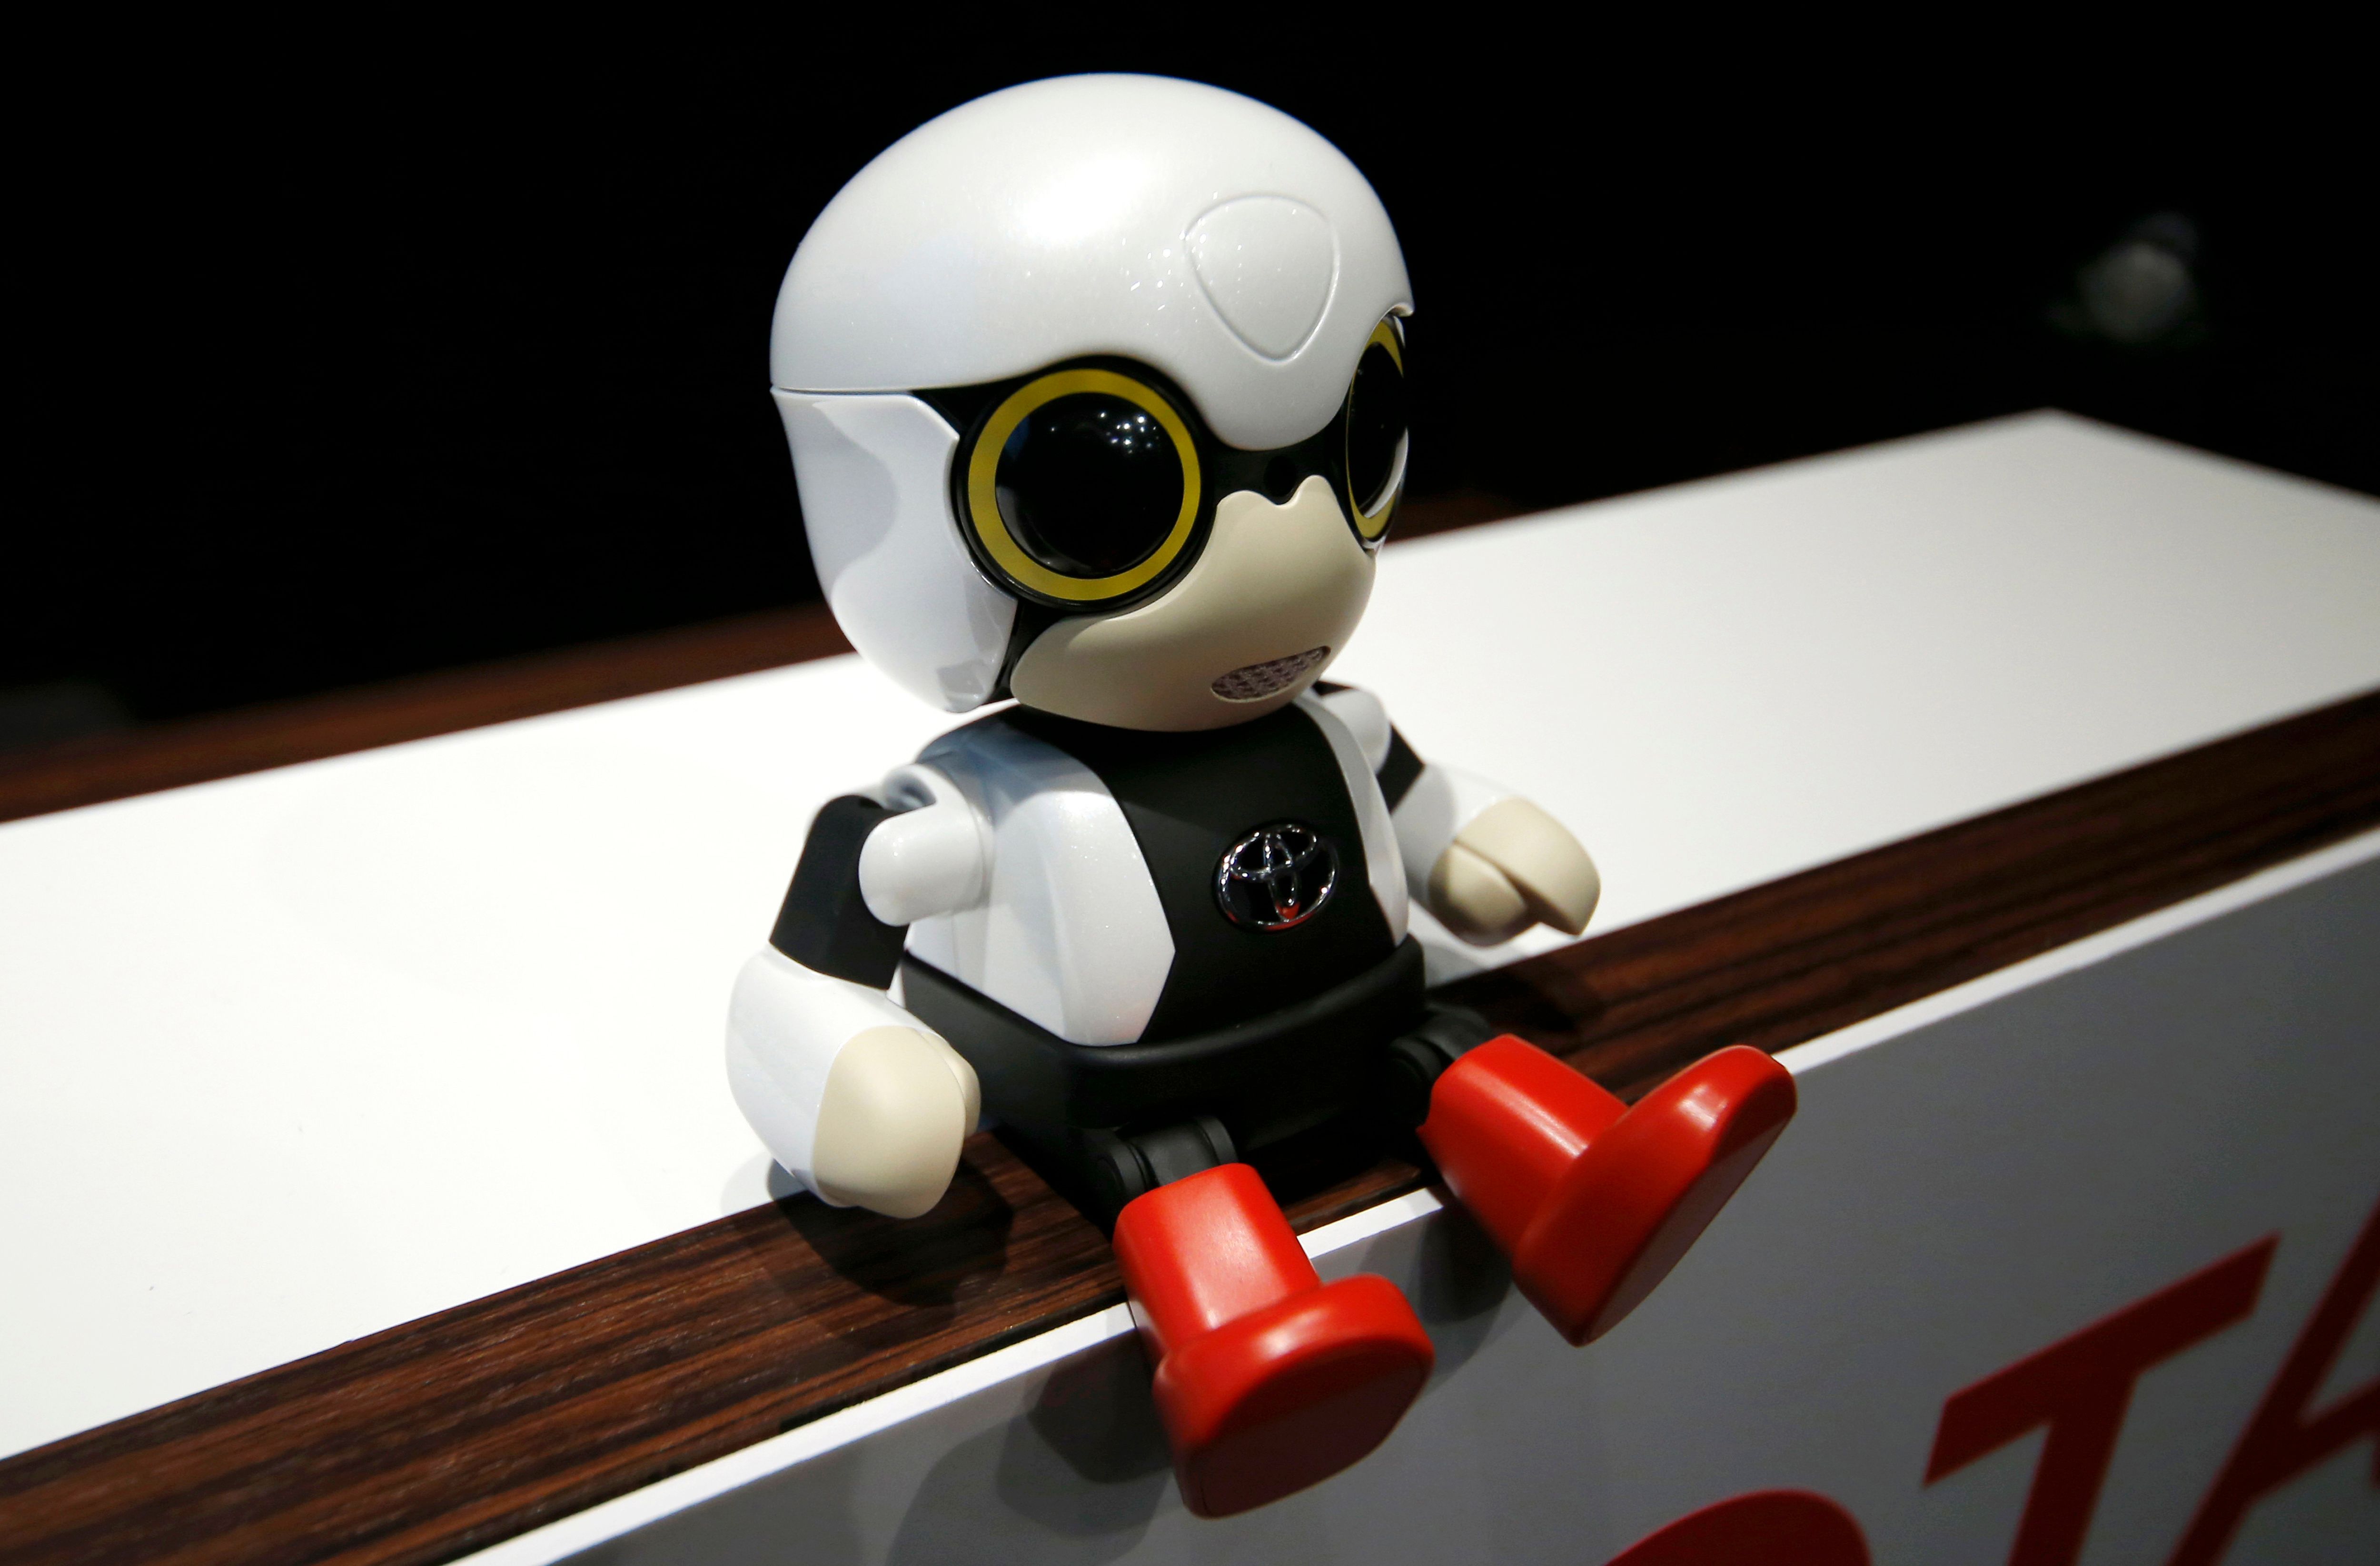 Toyota's tiny robot sells for under $400, talks, can't drive | The